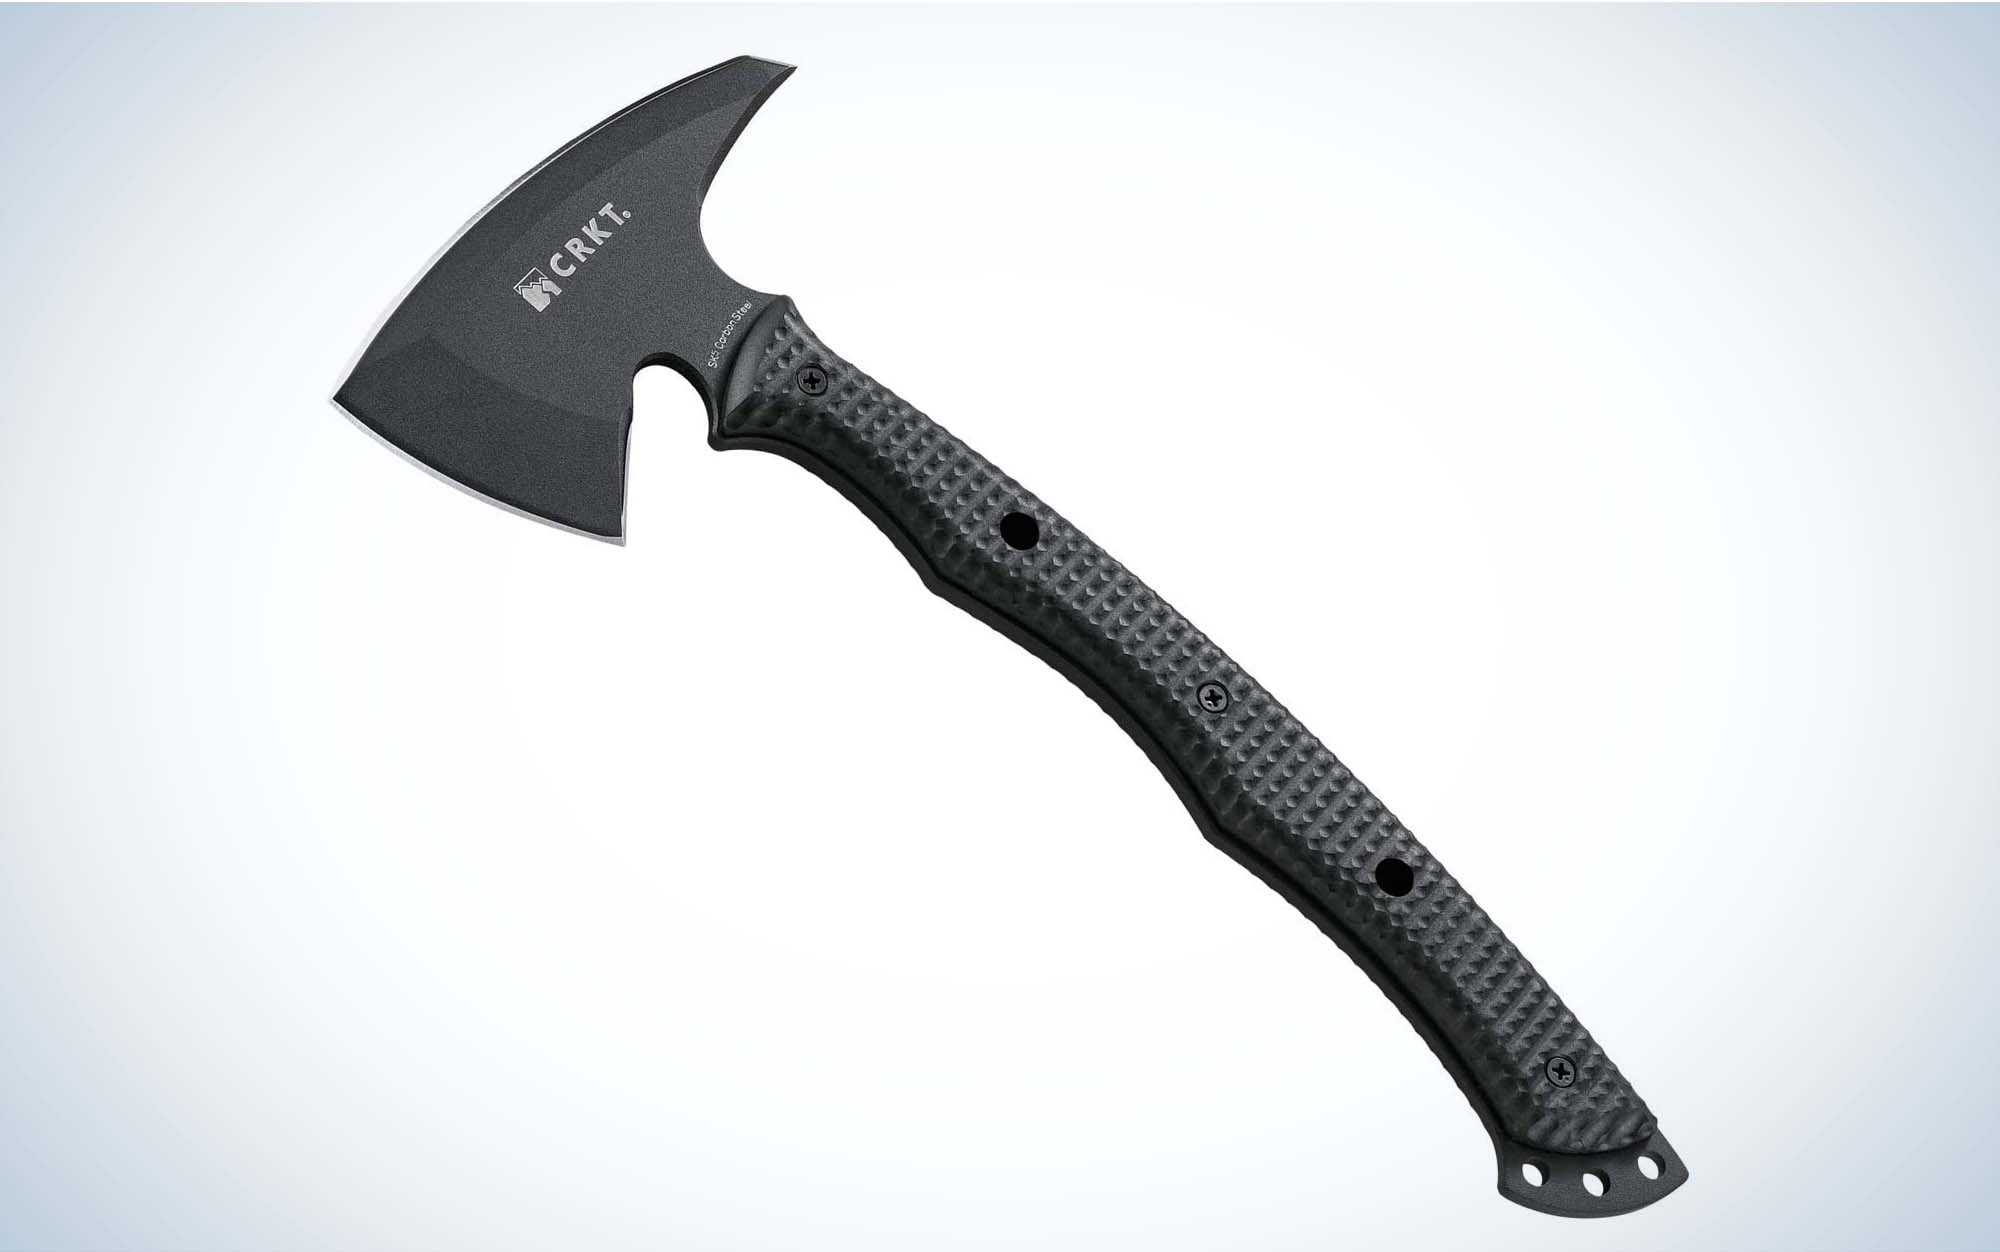 The CRKT Johnson Kangee is the best tactical tomahawk.